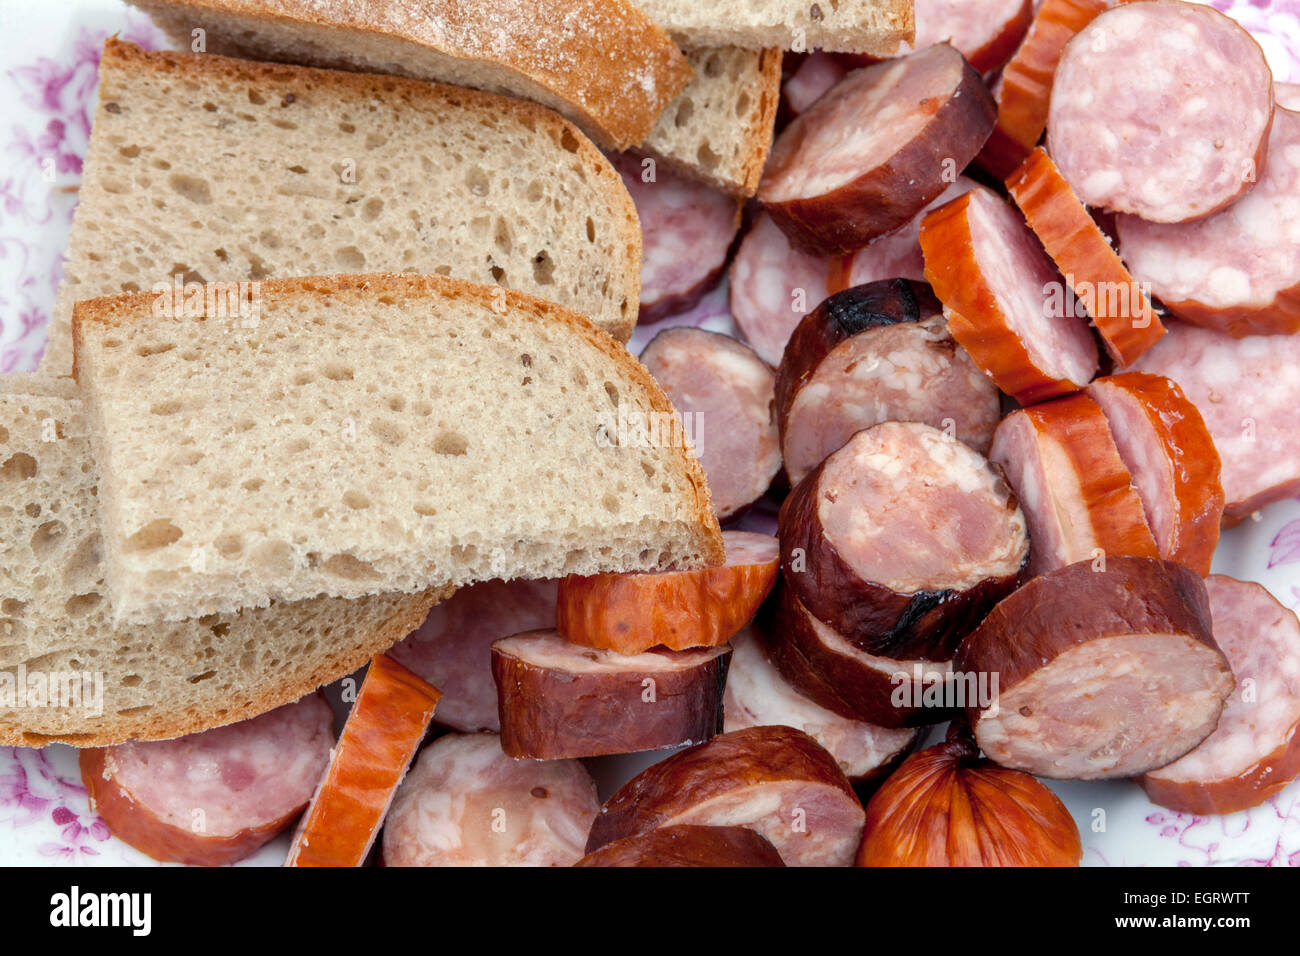 Sliced bread and salami Czech food Sausage Stock Photo